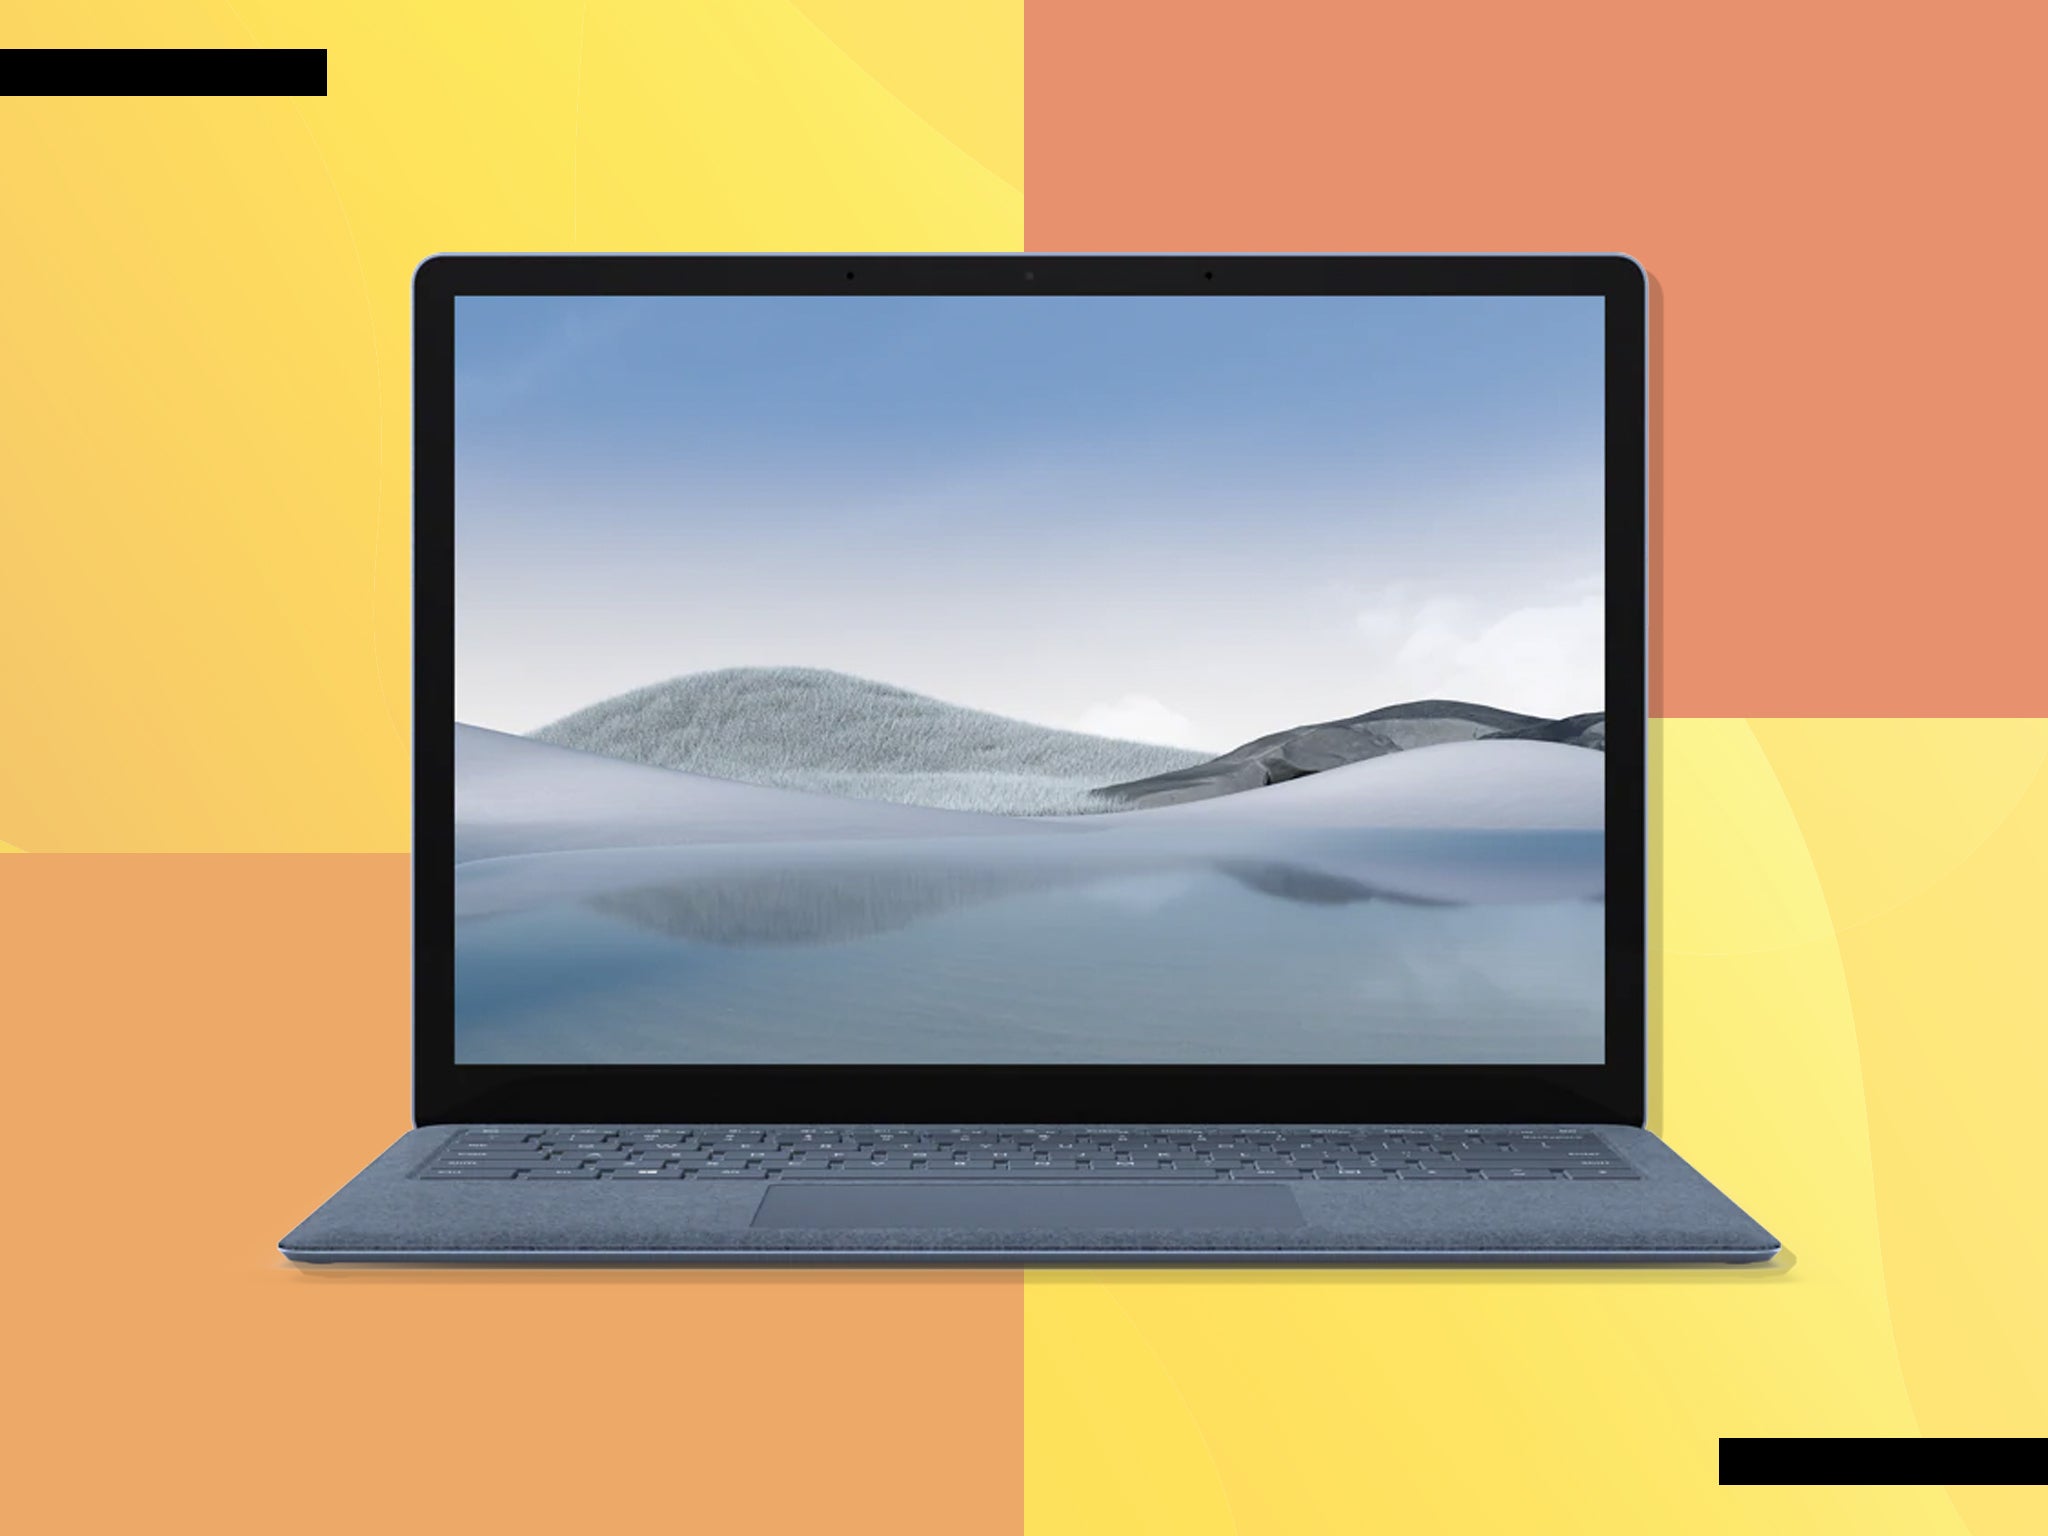 Microsoft starts selling the Surface Laptop and Surface Pro